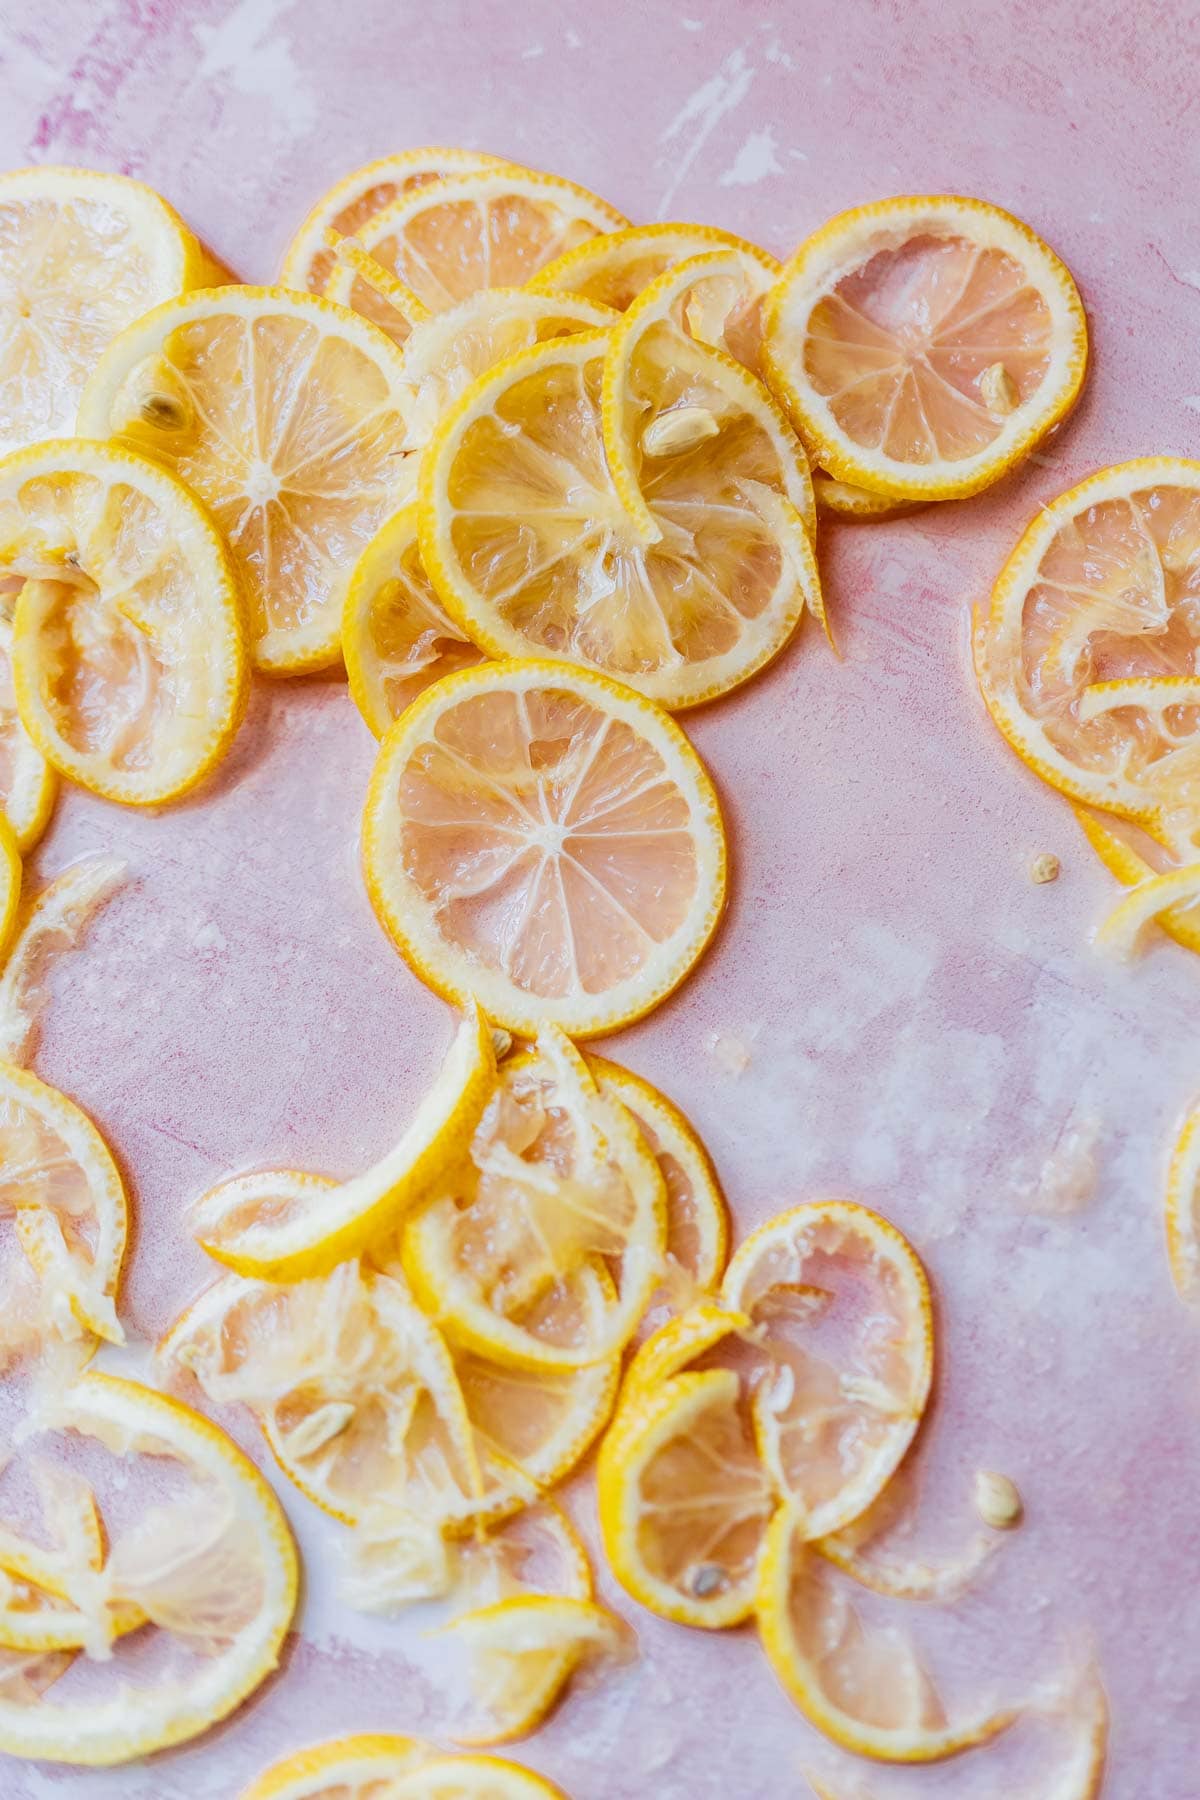 The Best Candied Lemon Slices - Alphafoodie